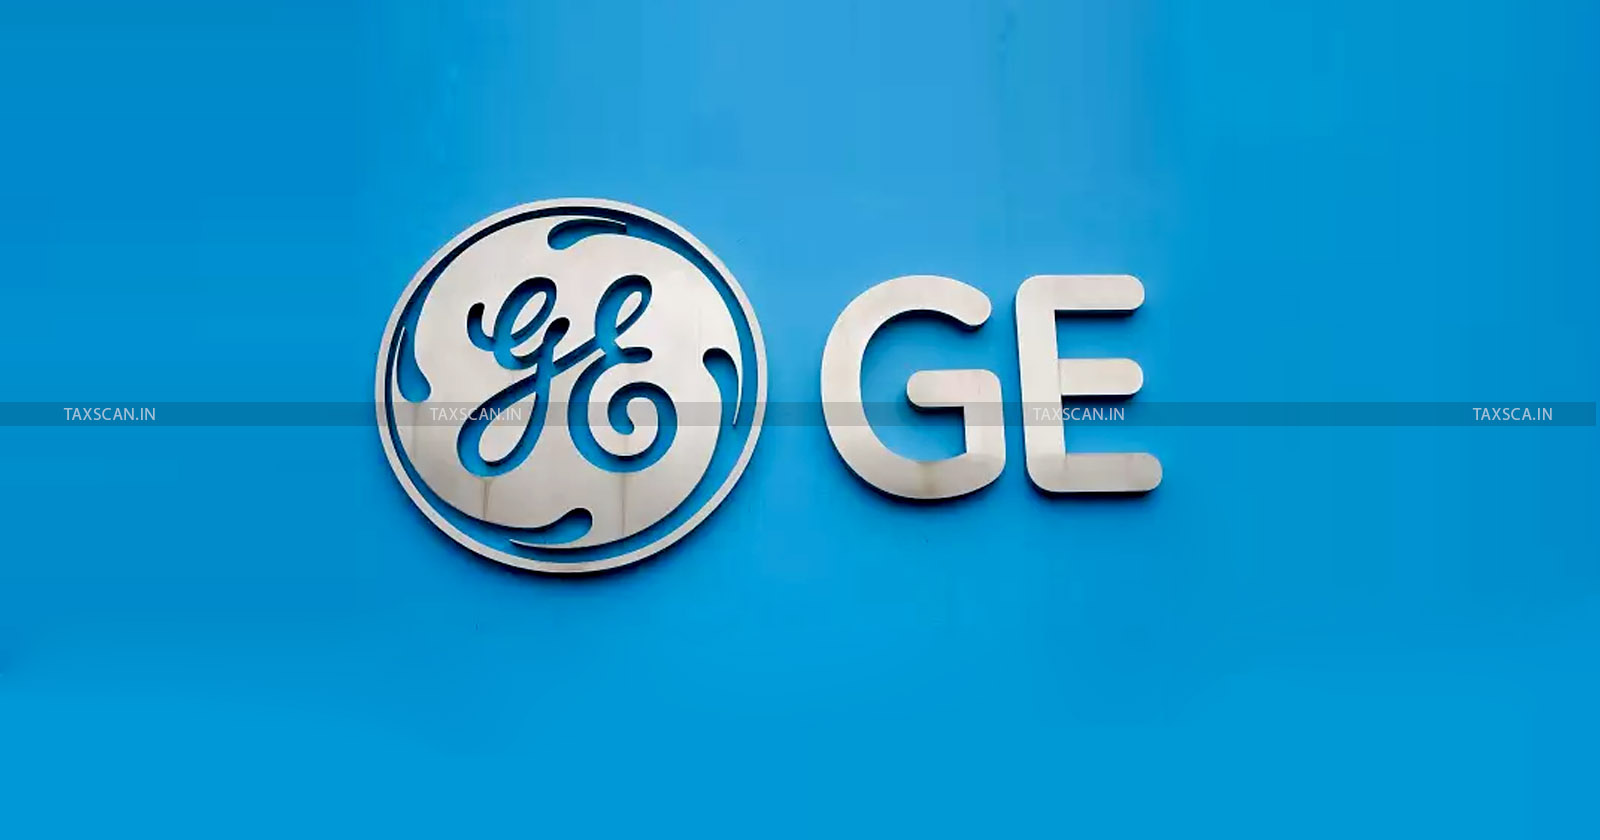 CA - MBA Vacancy in GE - TAXSCAN